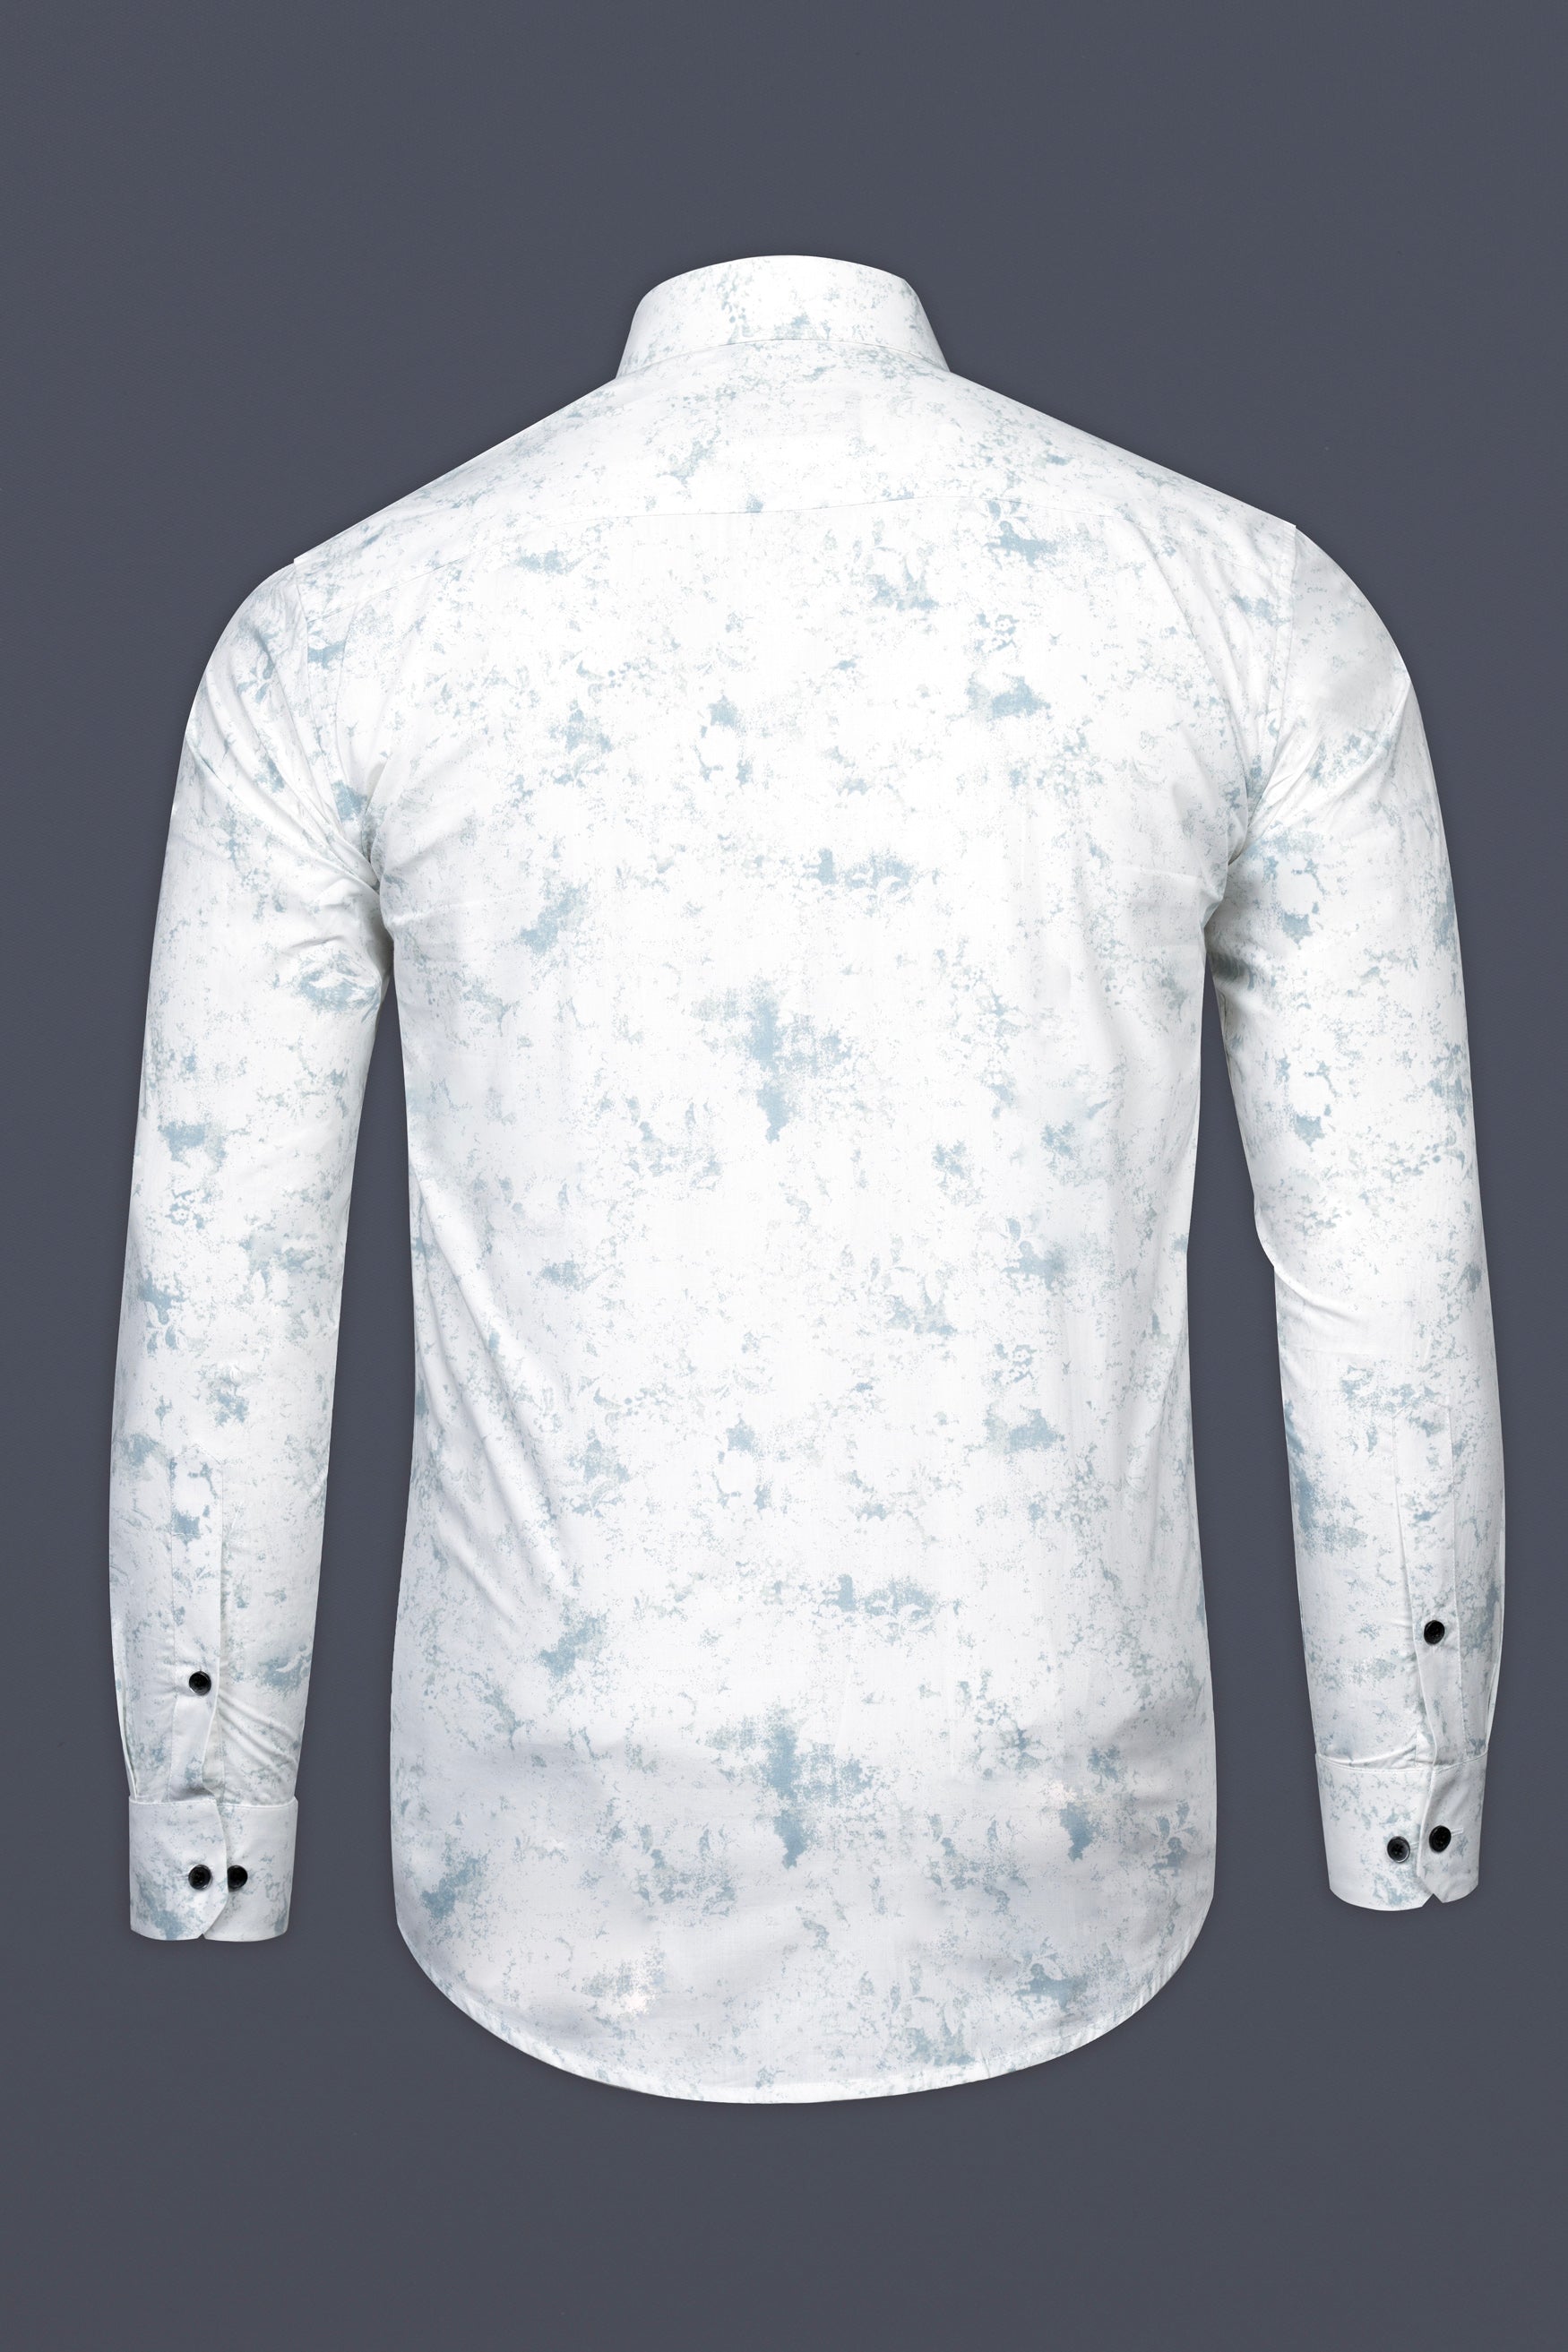 Bright White with French Gray Marble Prints with Black Button Patti Placket Super Soft Premium Designer Shirt